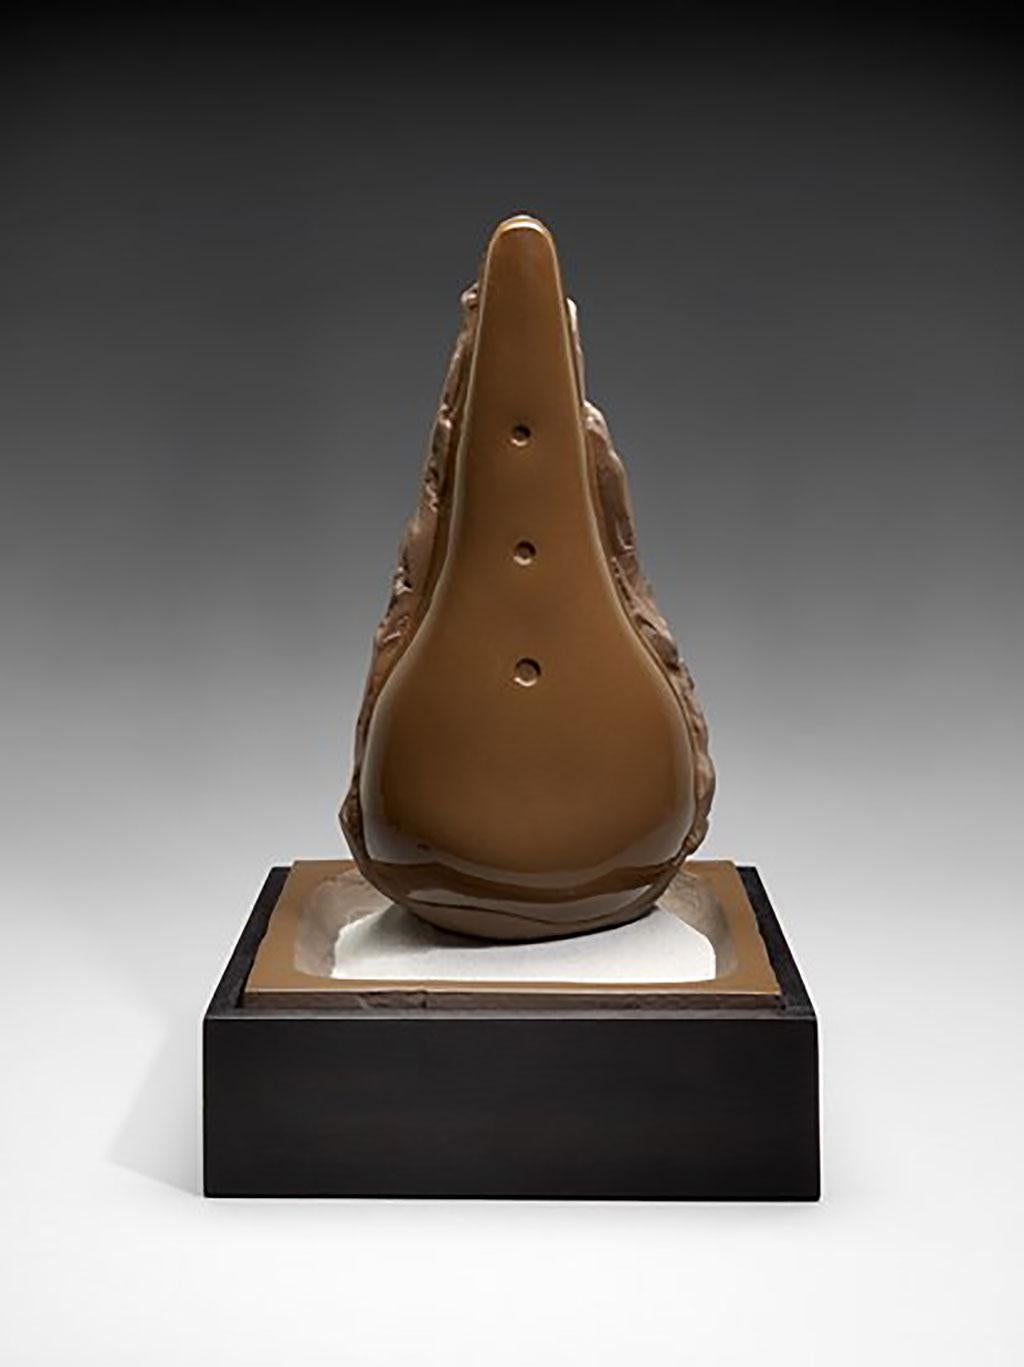 Glazed Ceramic, sand with mahogany base 
Signed and numbered
Edition of 36